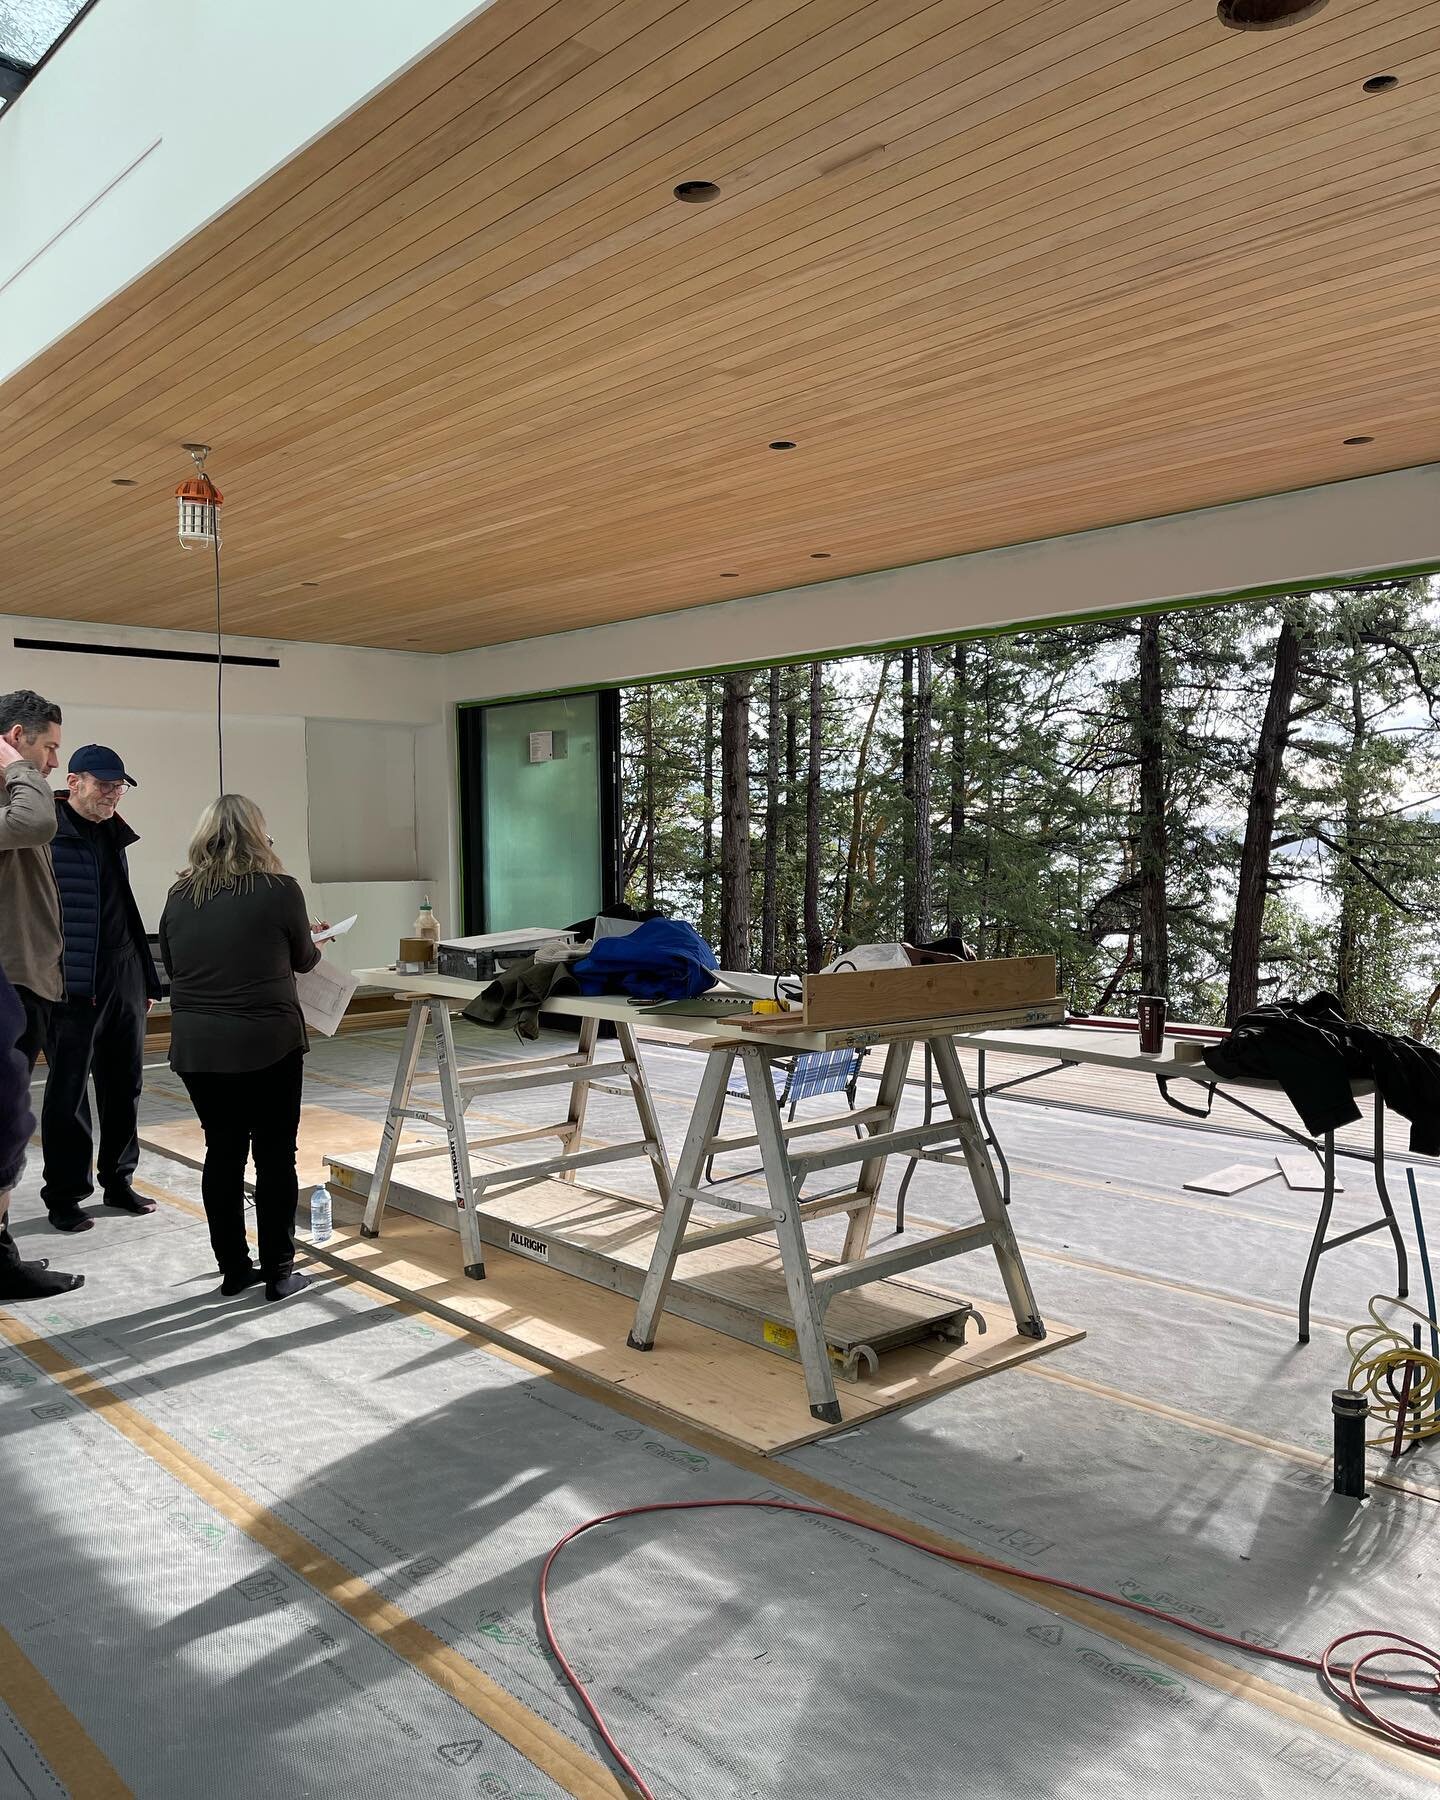 Another productive Friday site visit to our Maxham Rd project. The light quality in this building is so on-point 🫵🏽 @wovenarchitecturedesign  #architecture #modernhome #saltspringisland #yyj